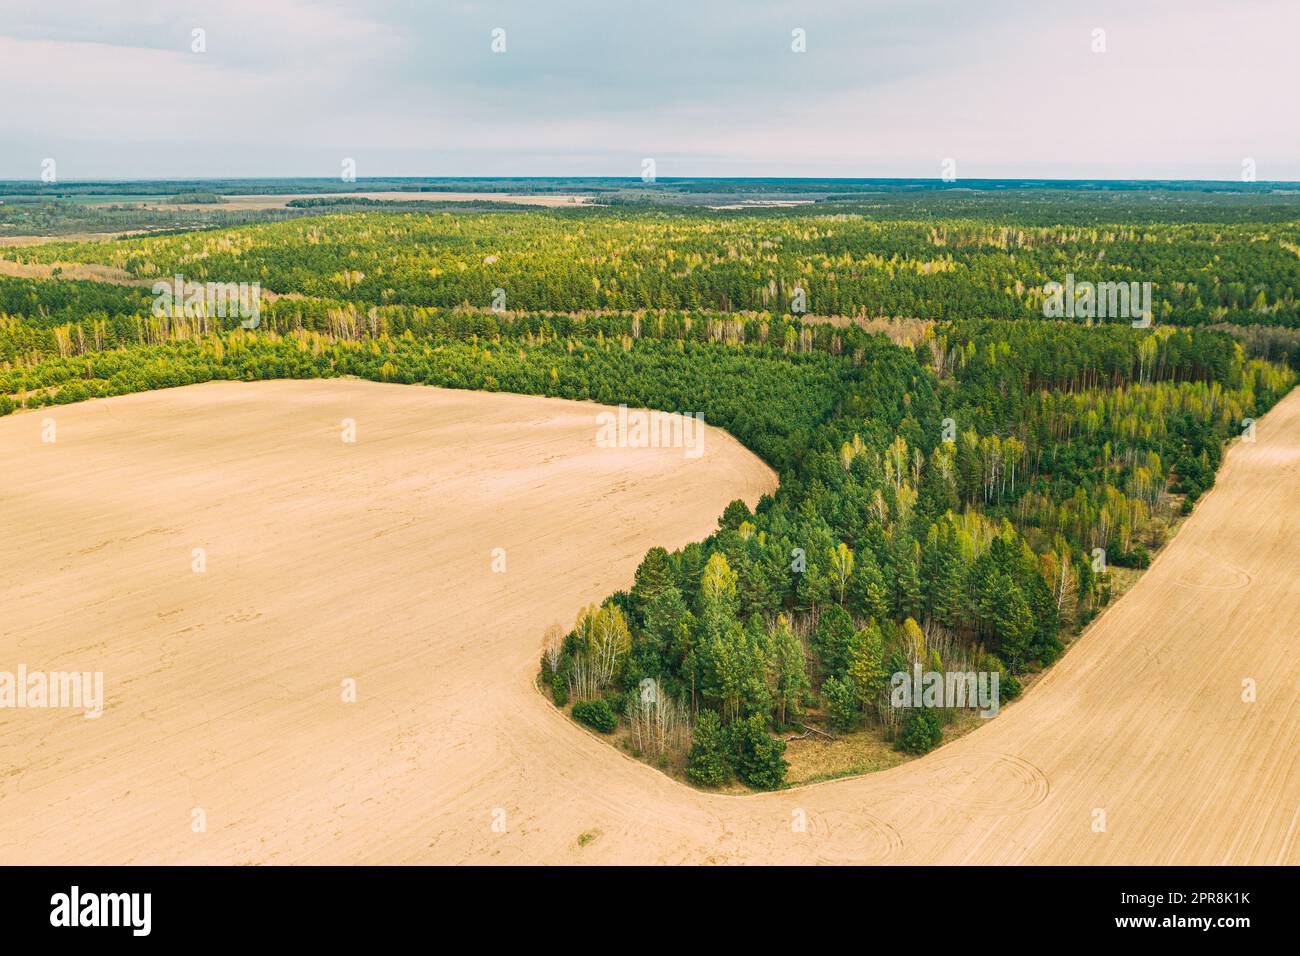 Aerial Top View Of Agricultural Landscape With Growing Forest Trees On Border With Field. Beautiful Rural Landscape In Bird's-eye View. Spring Field With Empty Soil Stock Photo